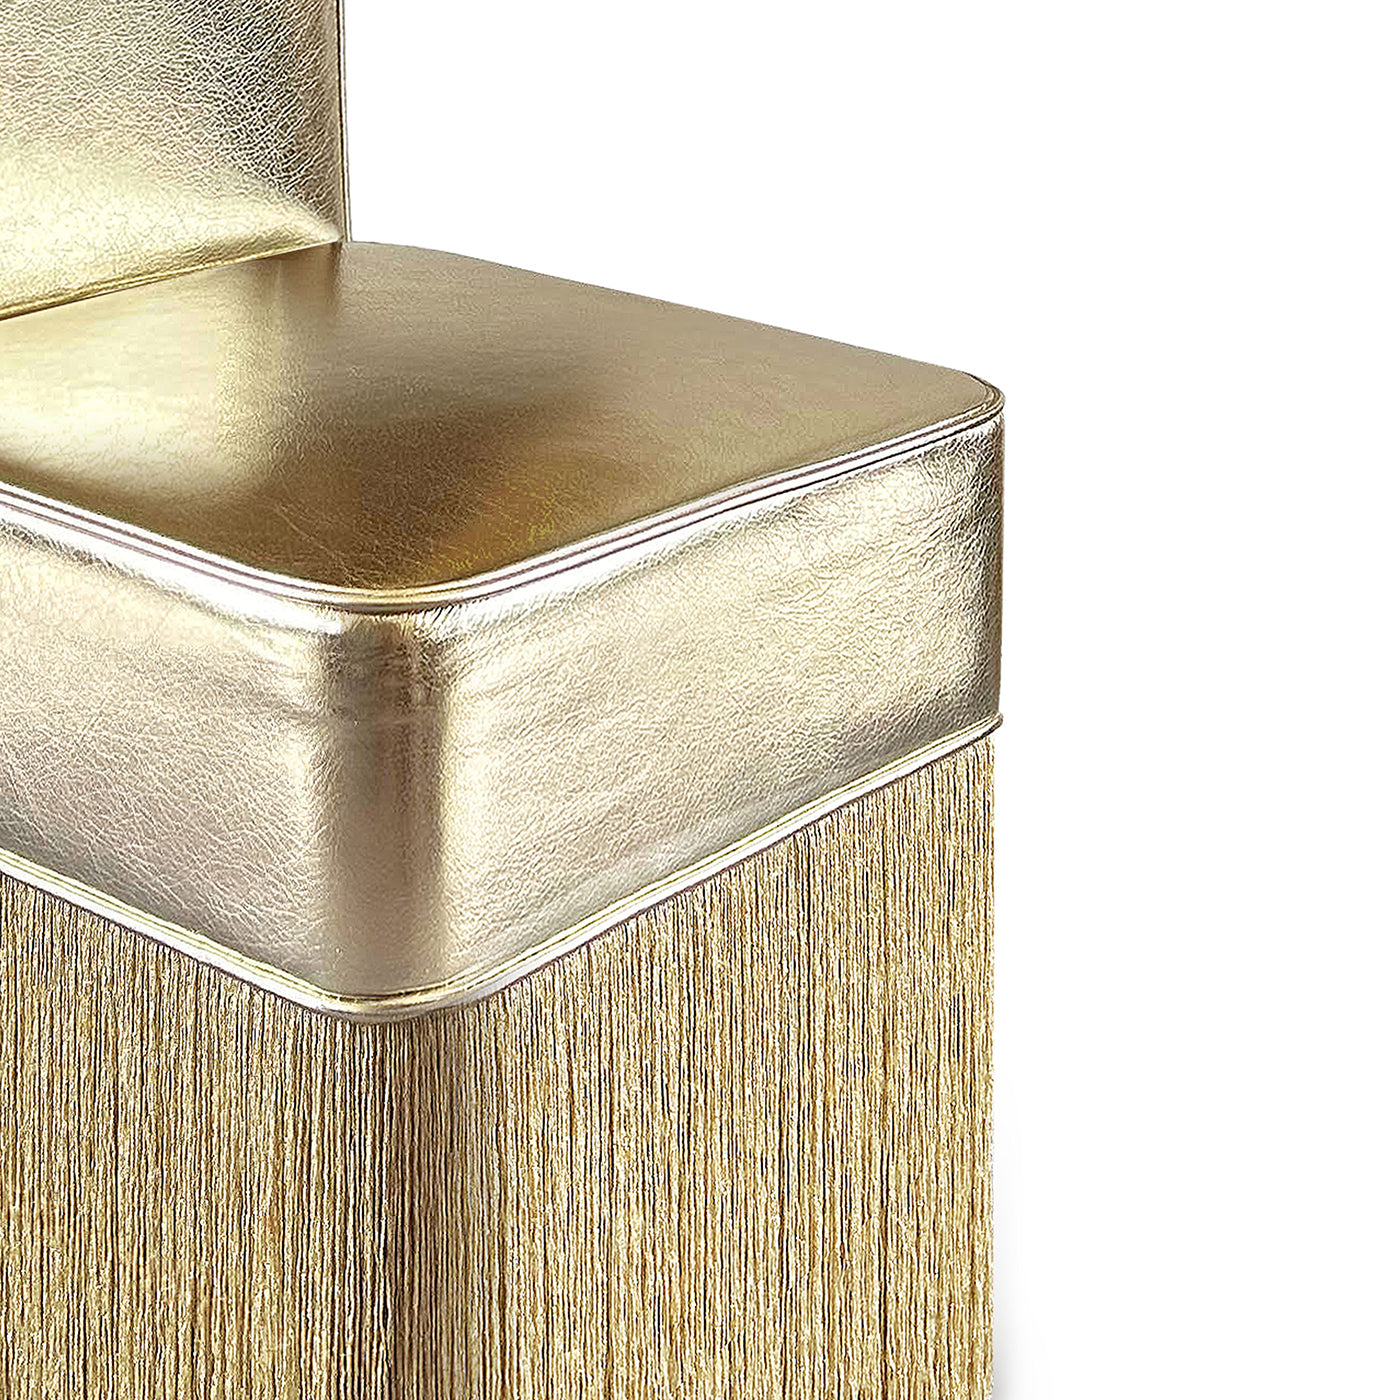 Lilli Gleaming Gold Metallic Leather with Lurex Fringes Armchair - Alternative view 1